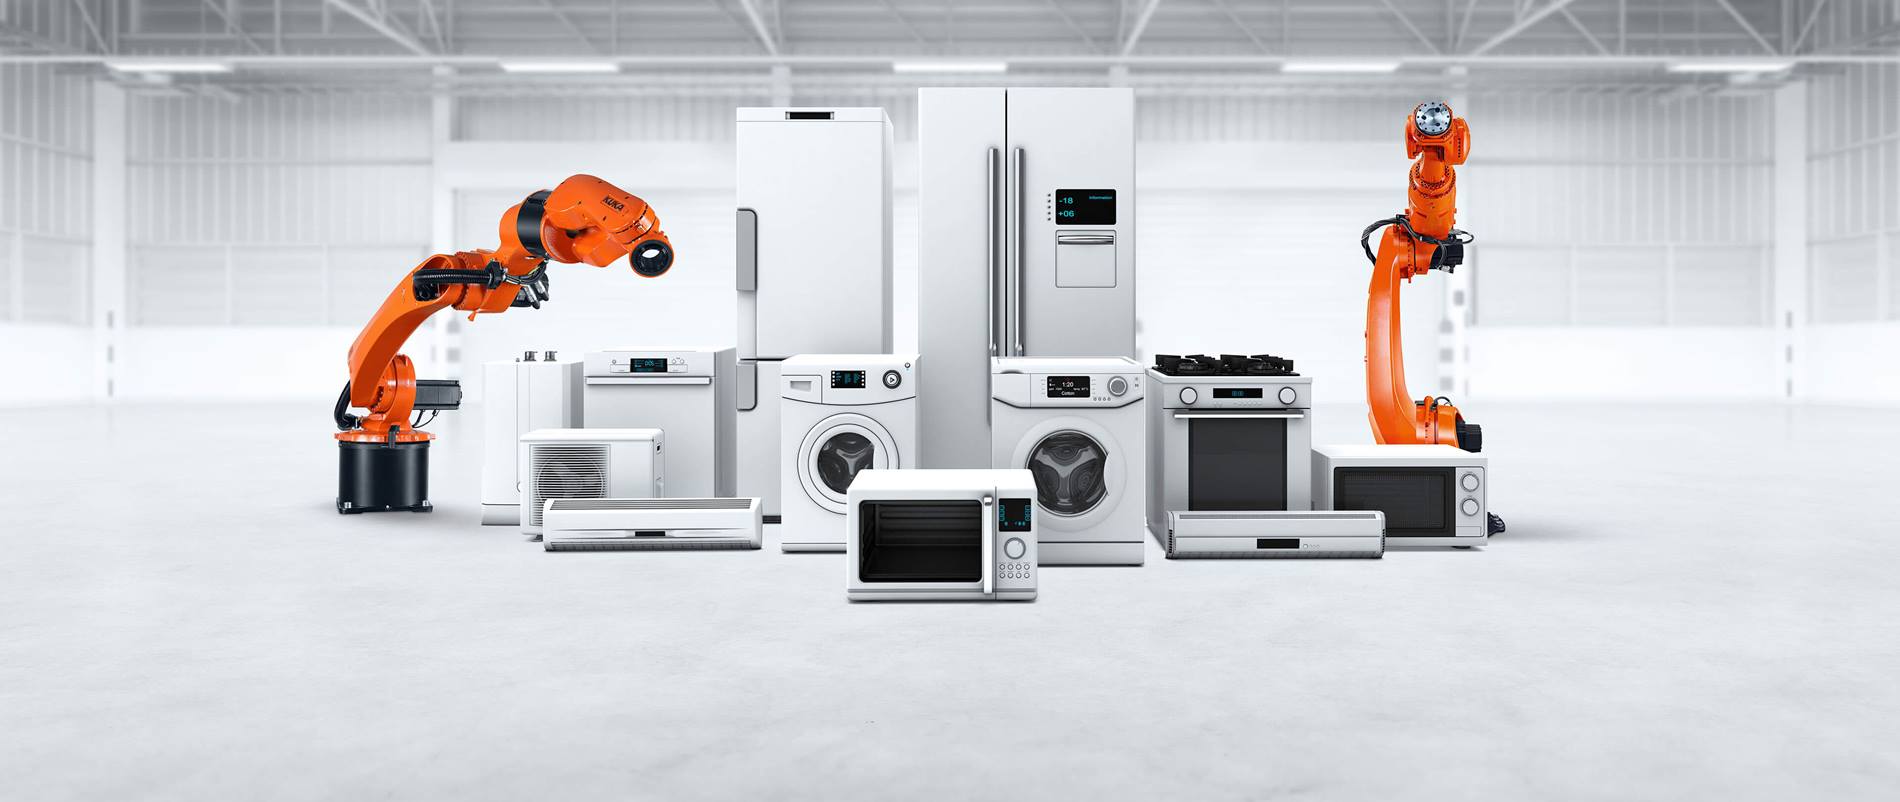 https://www.kuka.com/-/media/kuka-corporate/images/industries/electronics/white-goods/automatisierung-weisse-ware-produktion-headerbild-mit-robotern.jpg?rev=-1&w=1900&hash=1FB38A4DC2D1F0681DB8A7300F5319E9